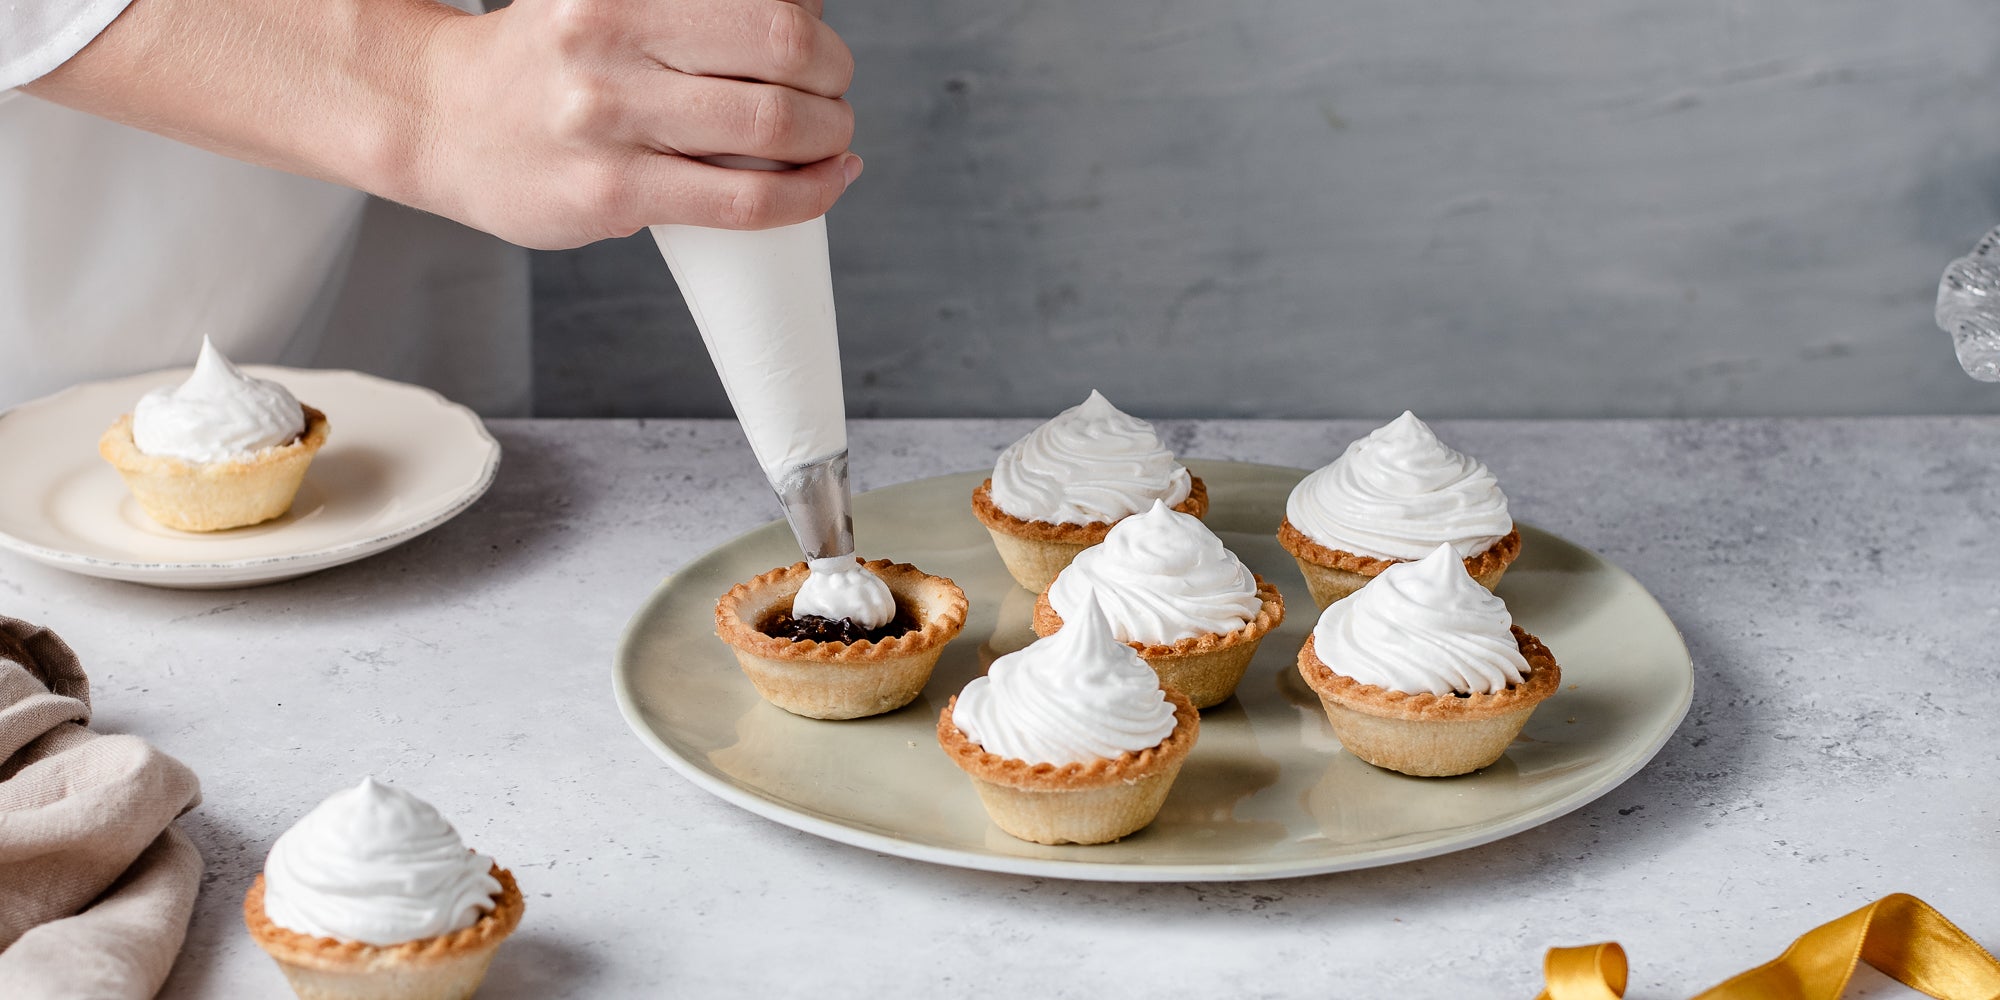 Meringue Topped Mince Pies being hand piped with meringue on a serving plate